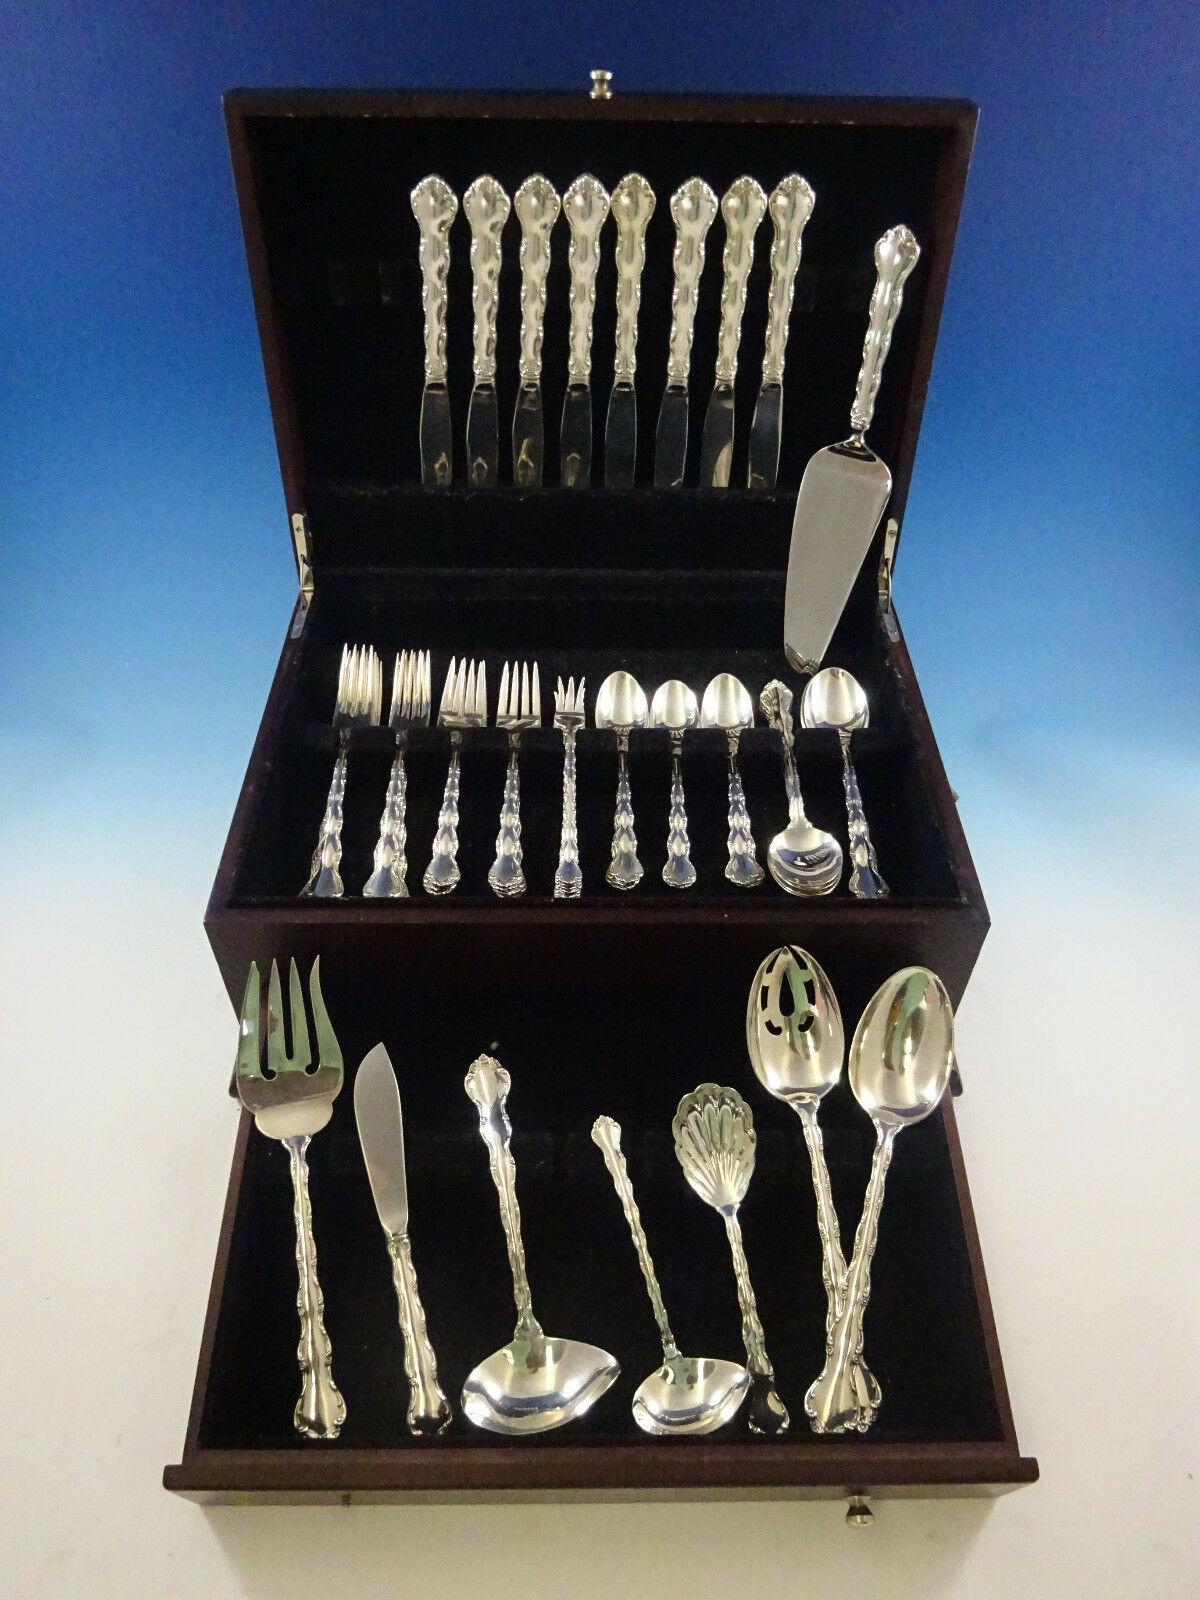 Beautiful Tara by Reed and Barton sterling silver flatware set - 56 pieces. This set includes:

8 knives, 9 1/8